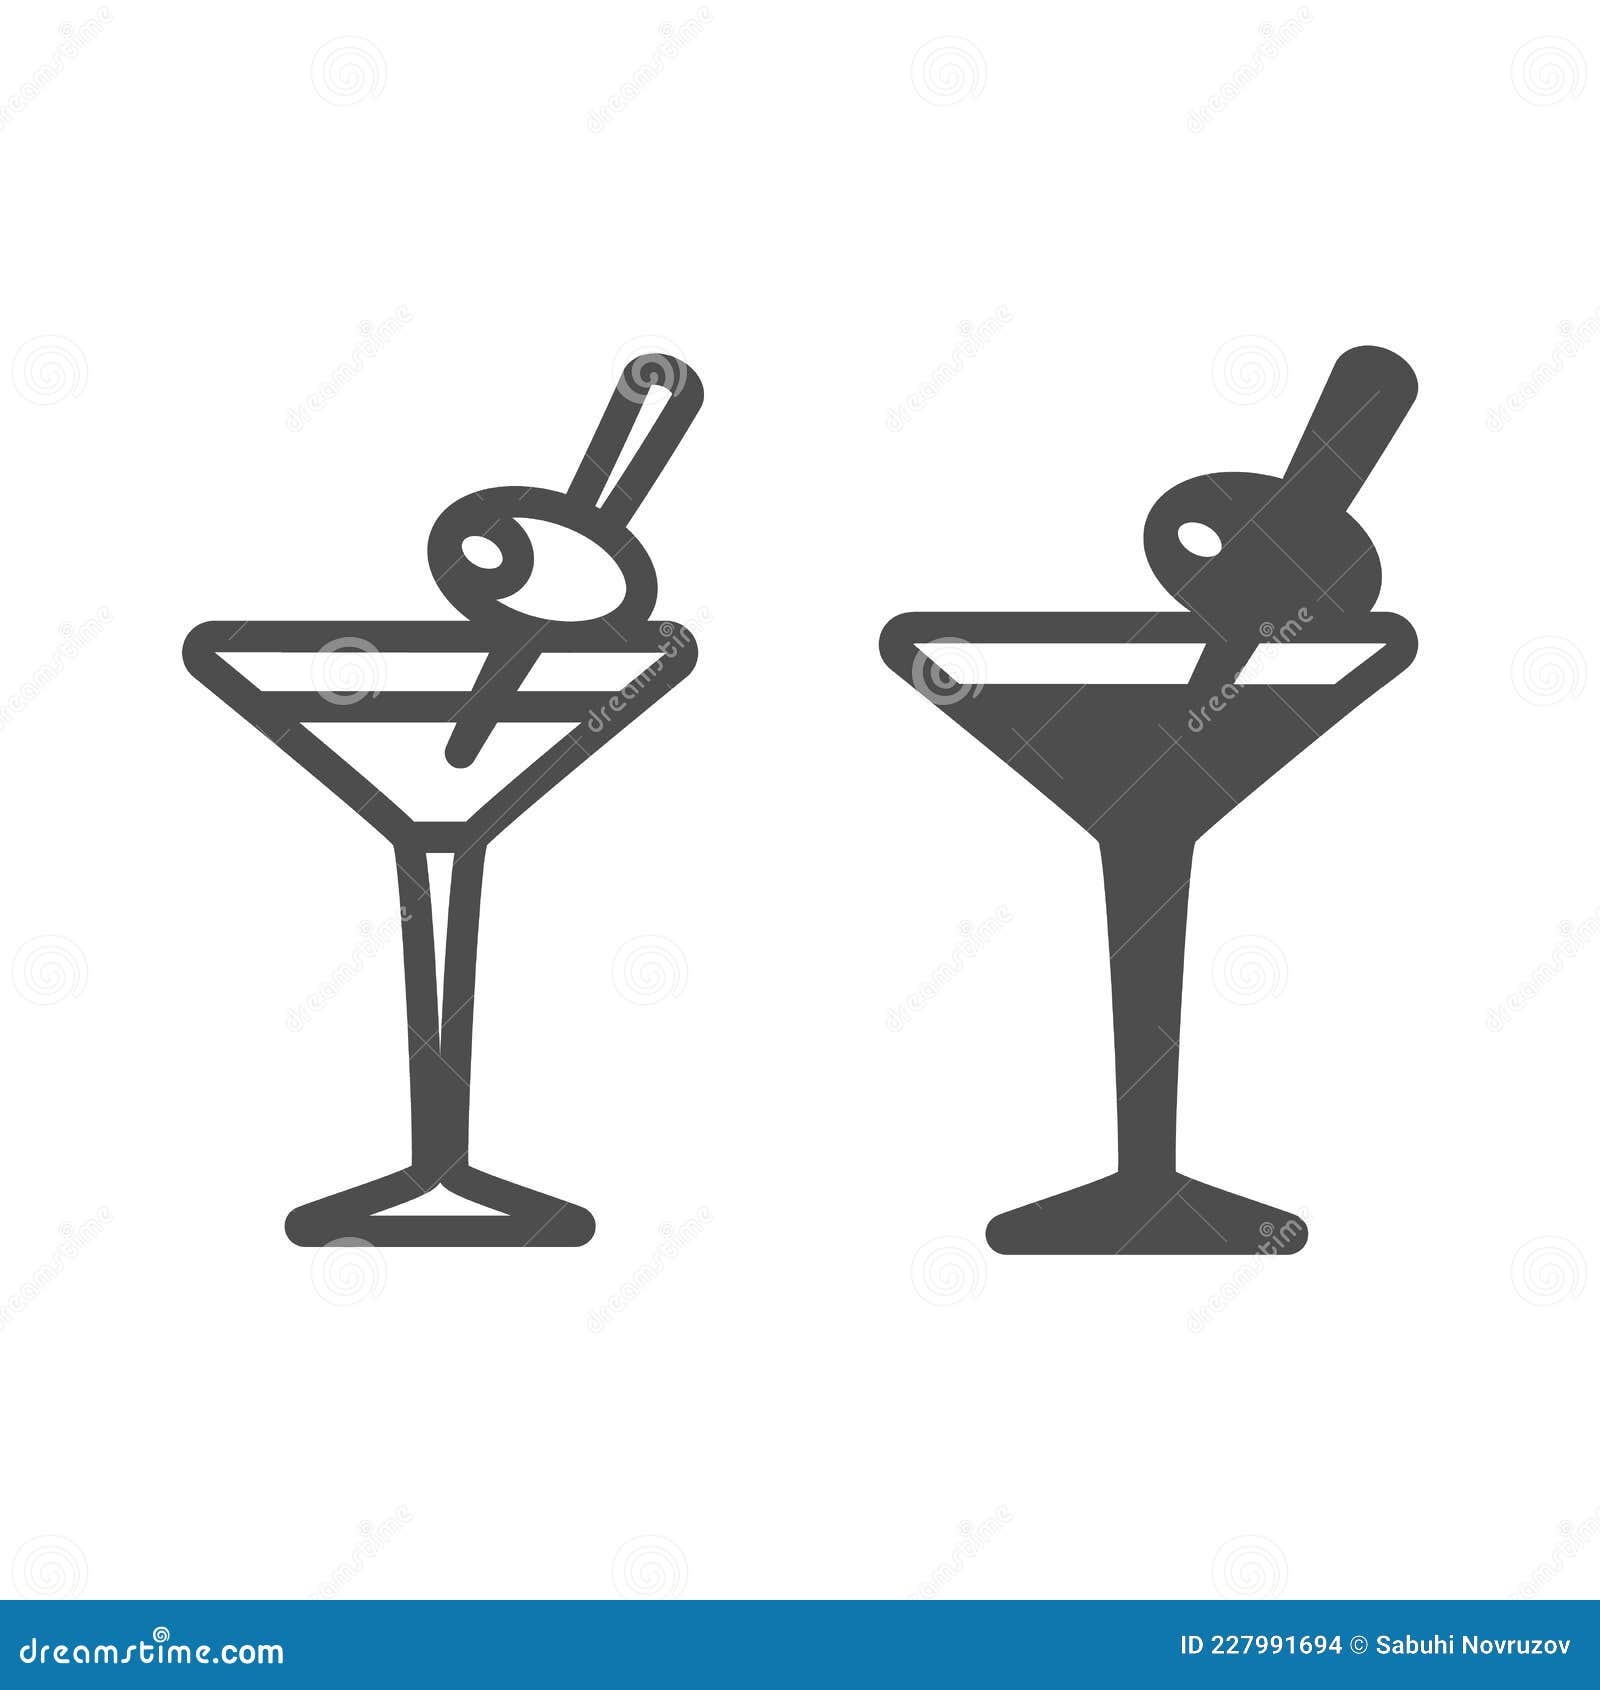 Martini icon. Cocktail glass with olive black symbol